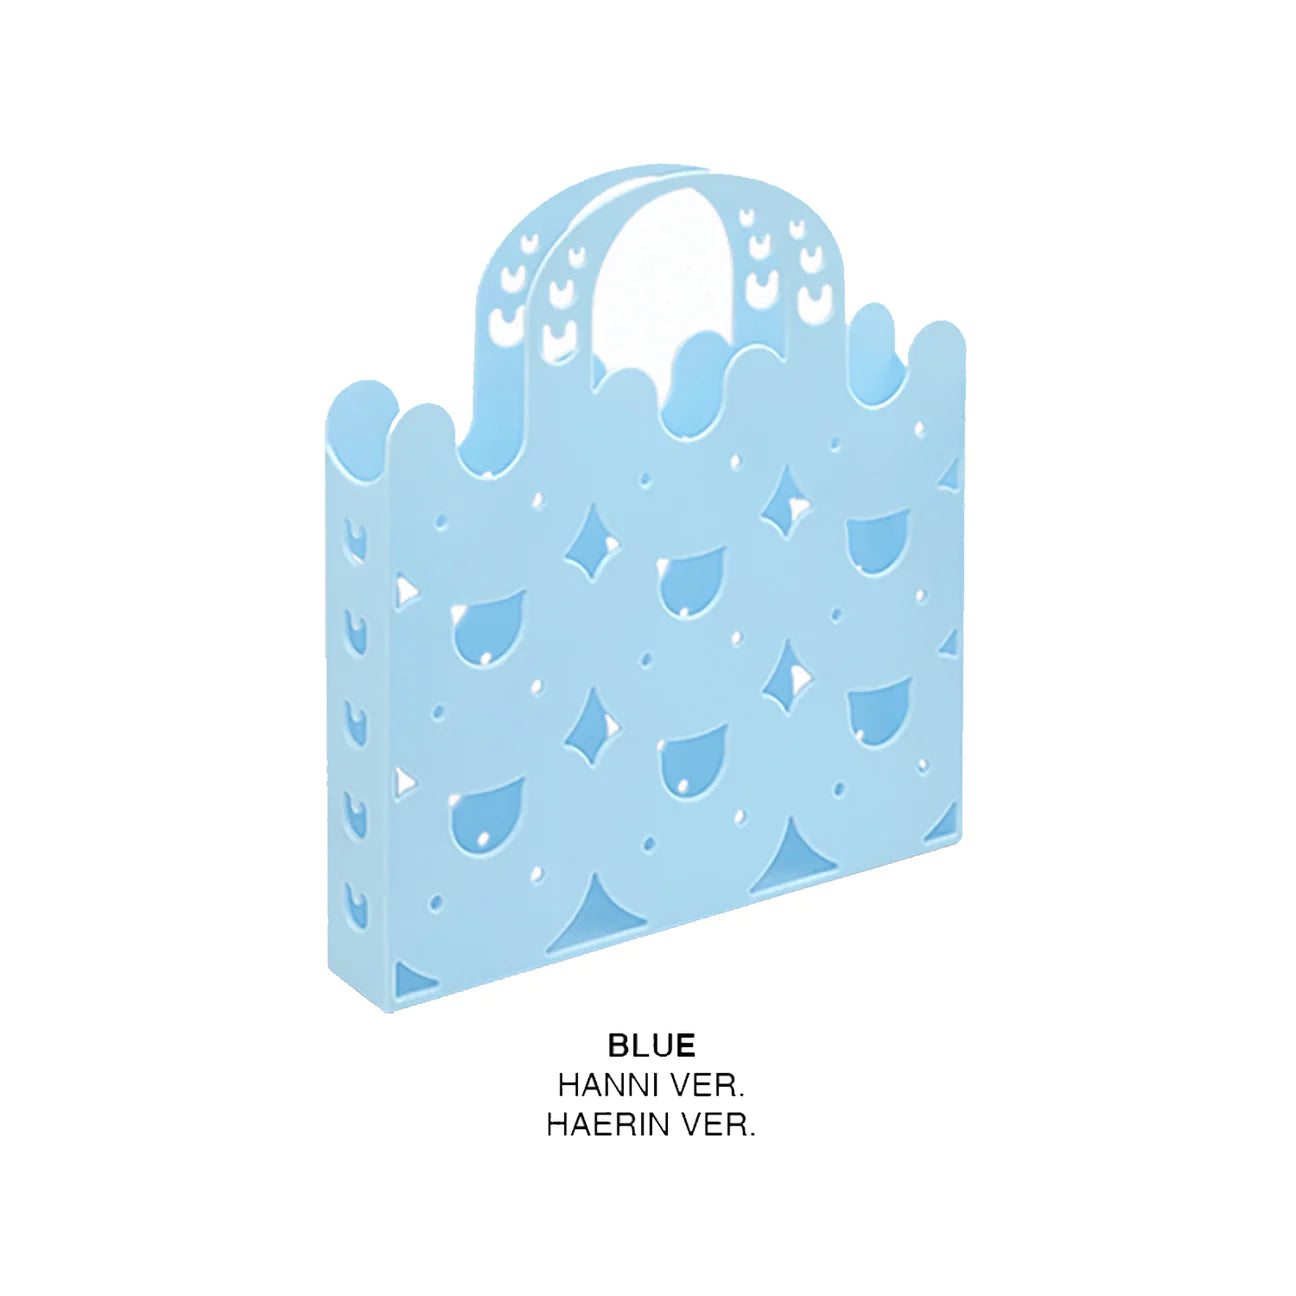 NEWJEANS - 2ND EP 'GET UP' [BUNNY BEACH BAG VER.] (6 VERSIONS)